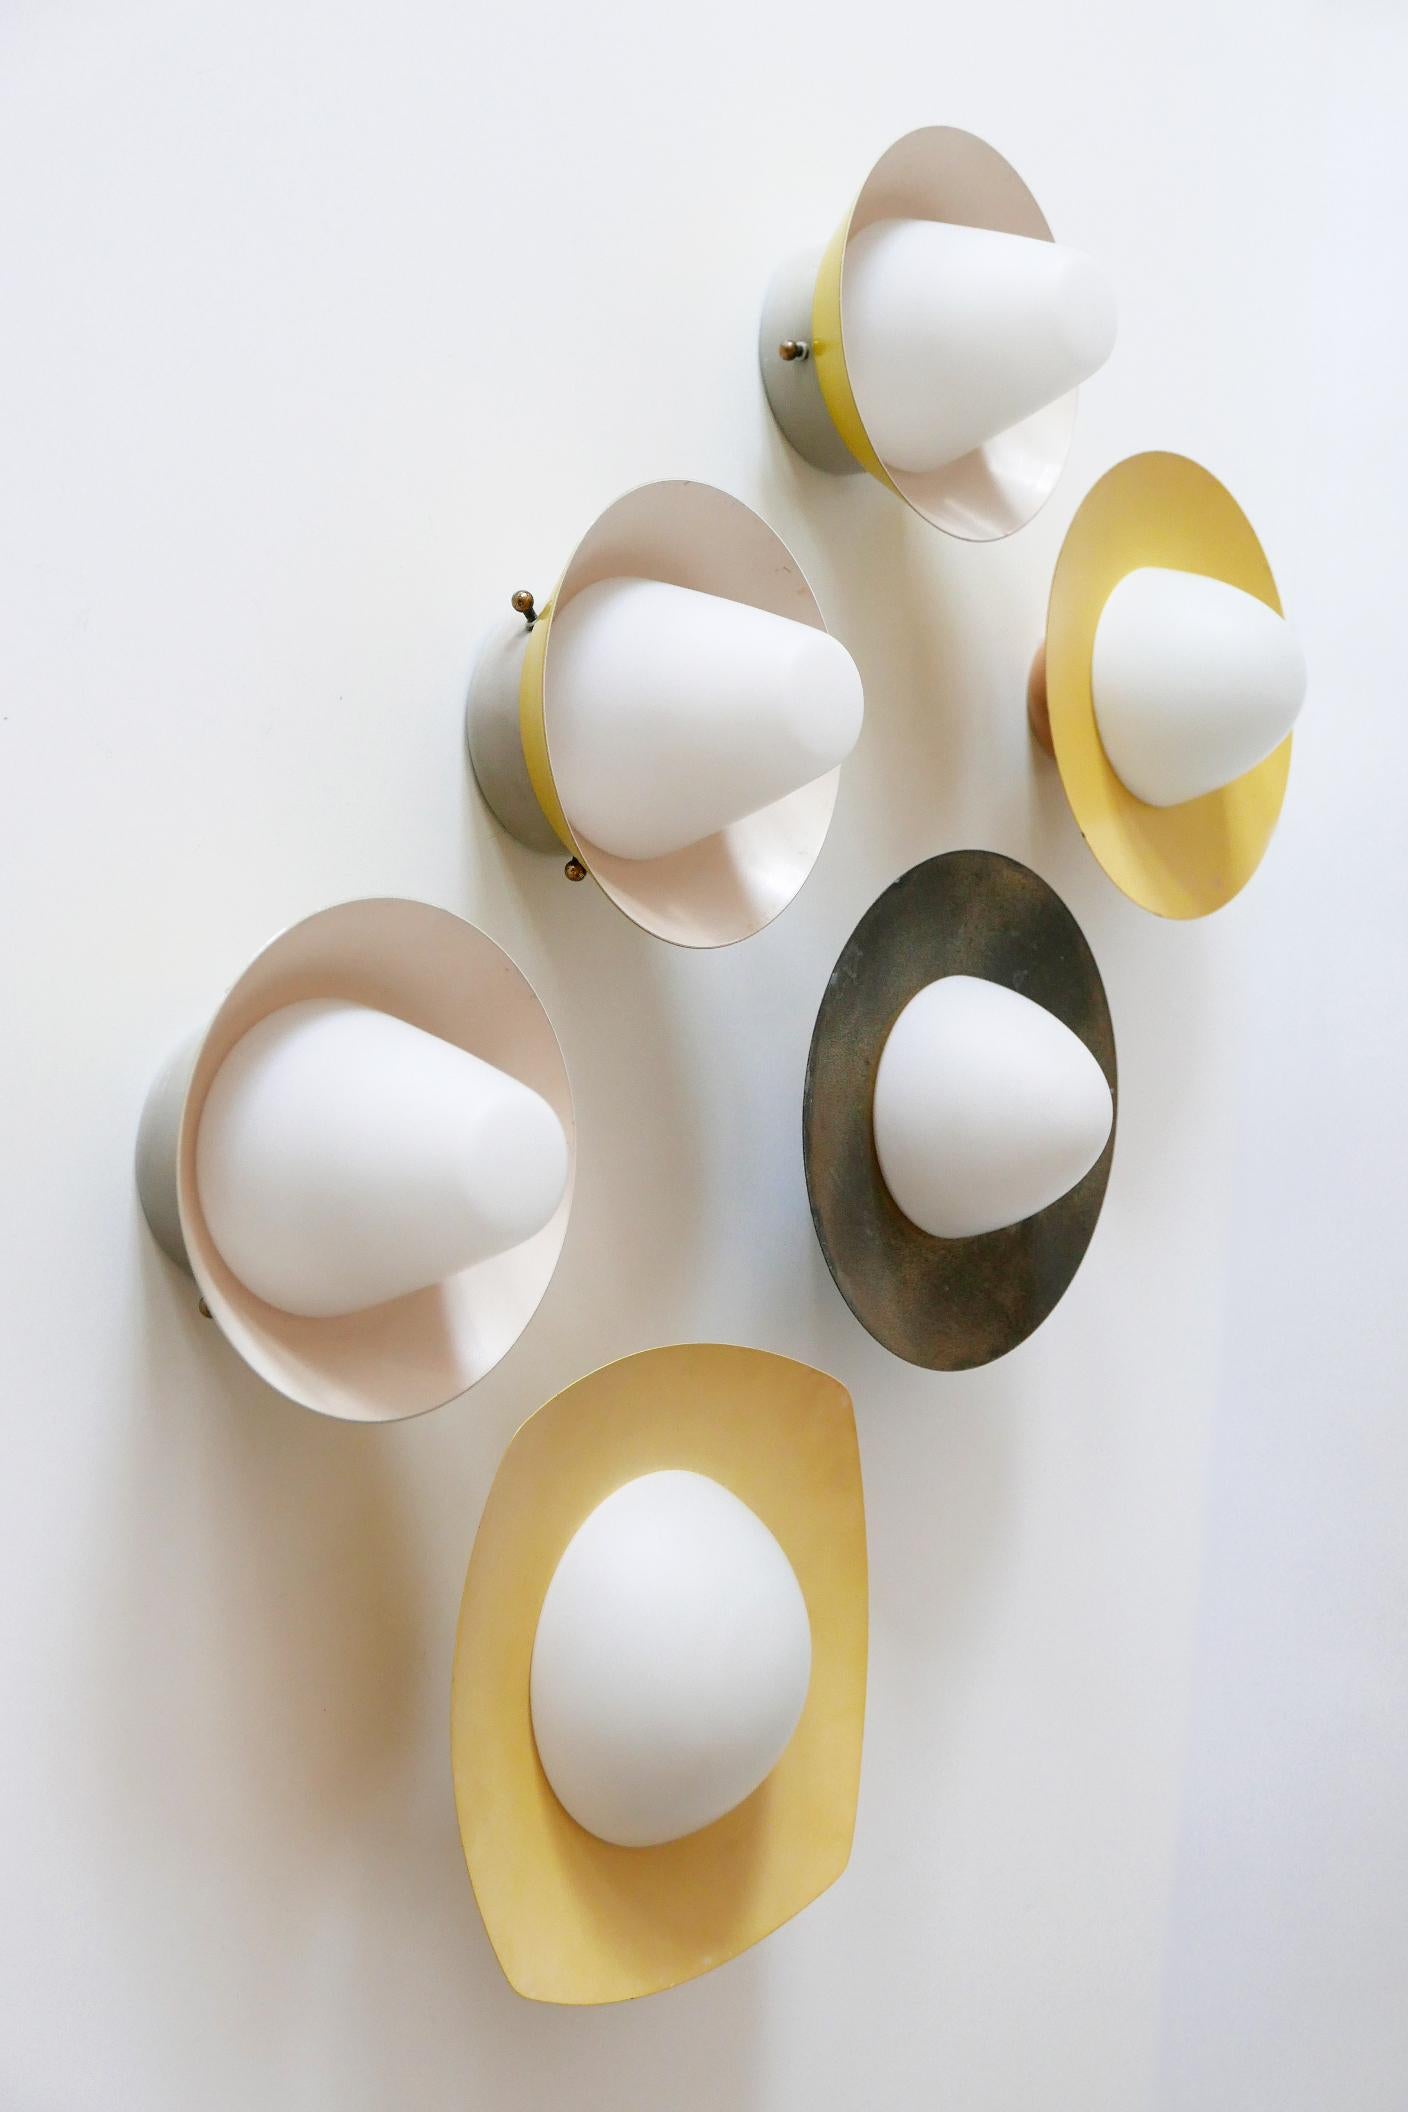 Lacquered Set of Six Amazing Wall Lamps or Sconces by Kaiser Leuchten, 1950s, Germany